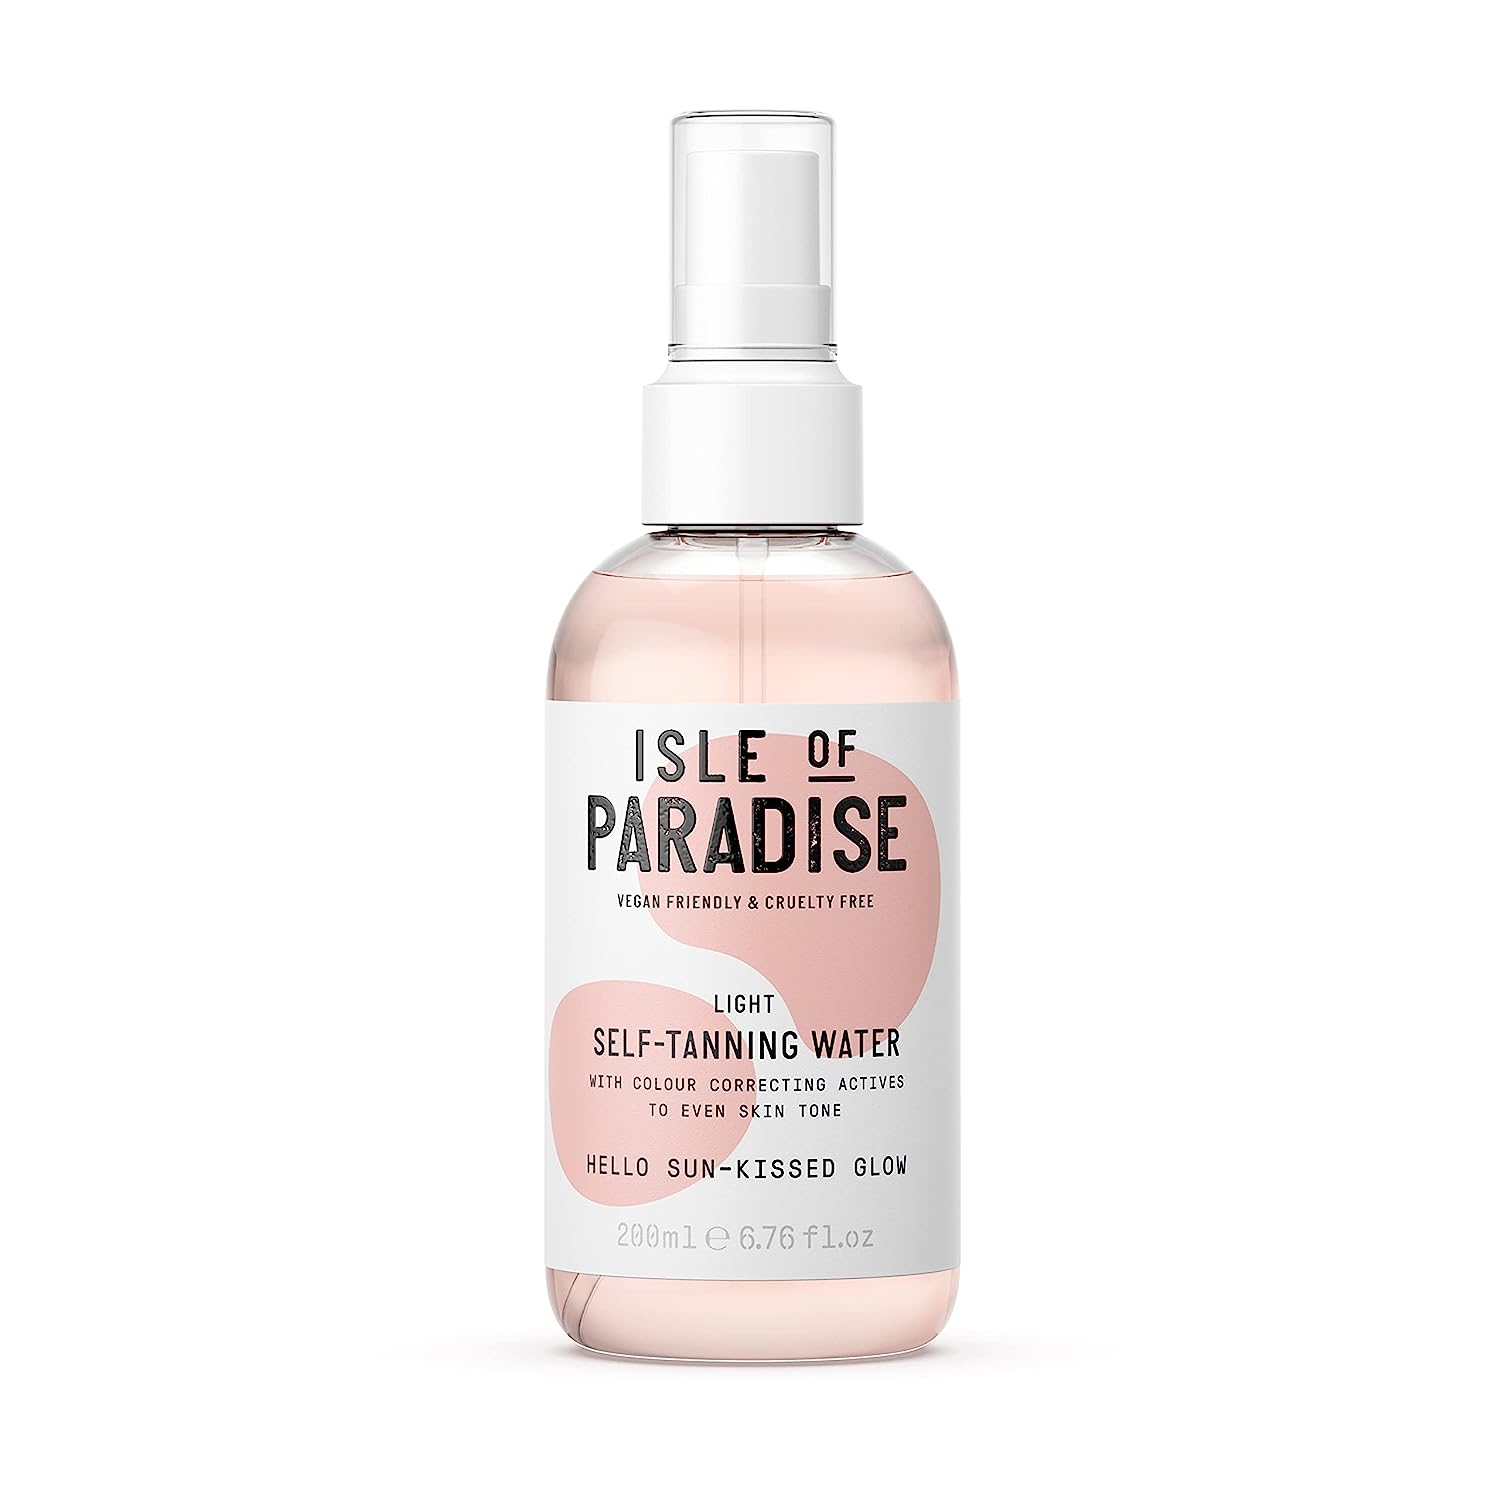 Isle of Paradise Self Tanning Water - Color Correcting [...]